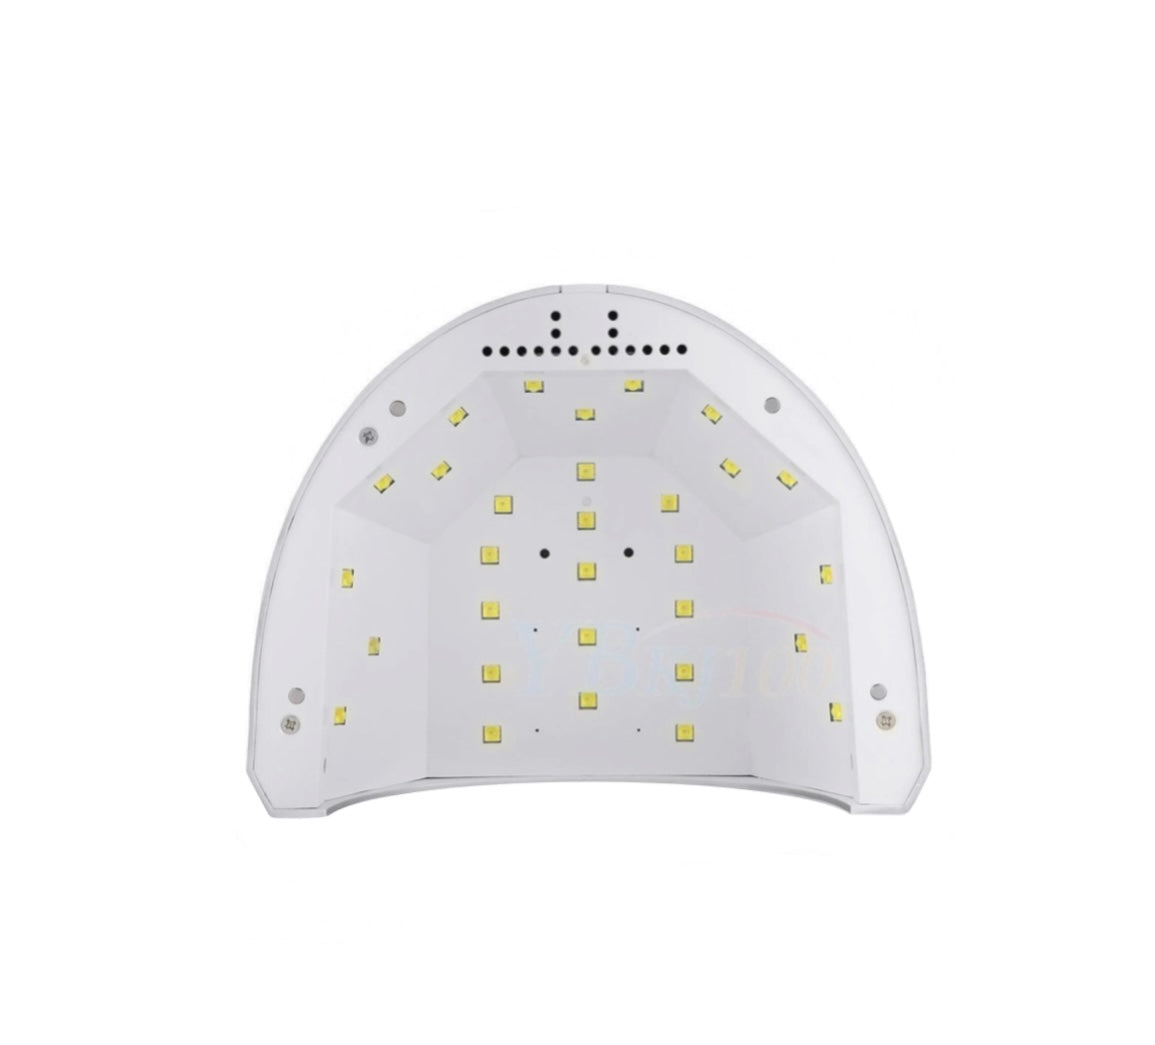 UV-LED LAMP Sun 1 for manicure and pedicure